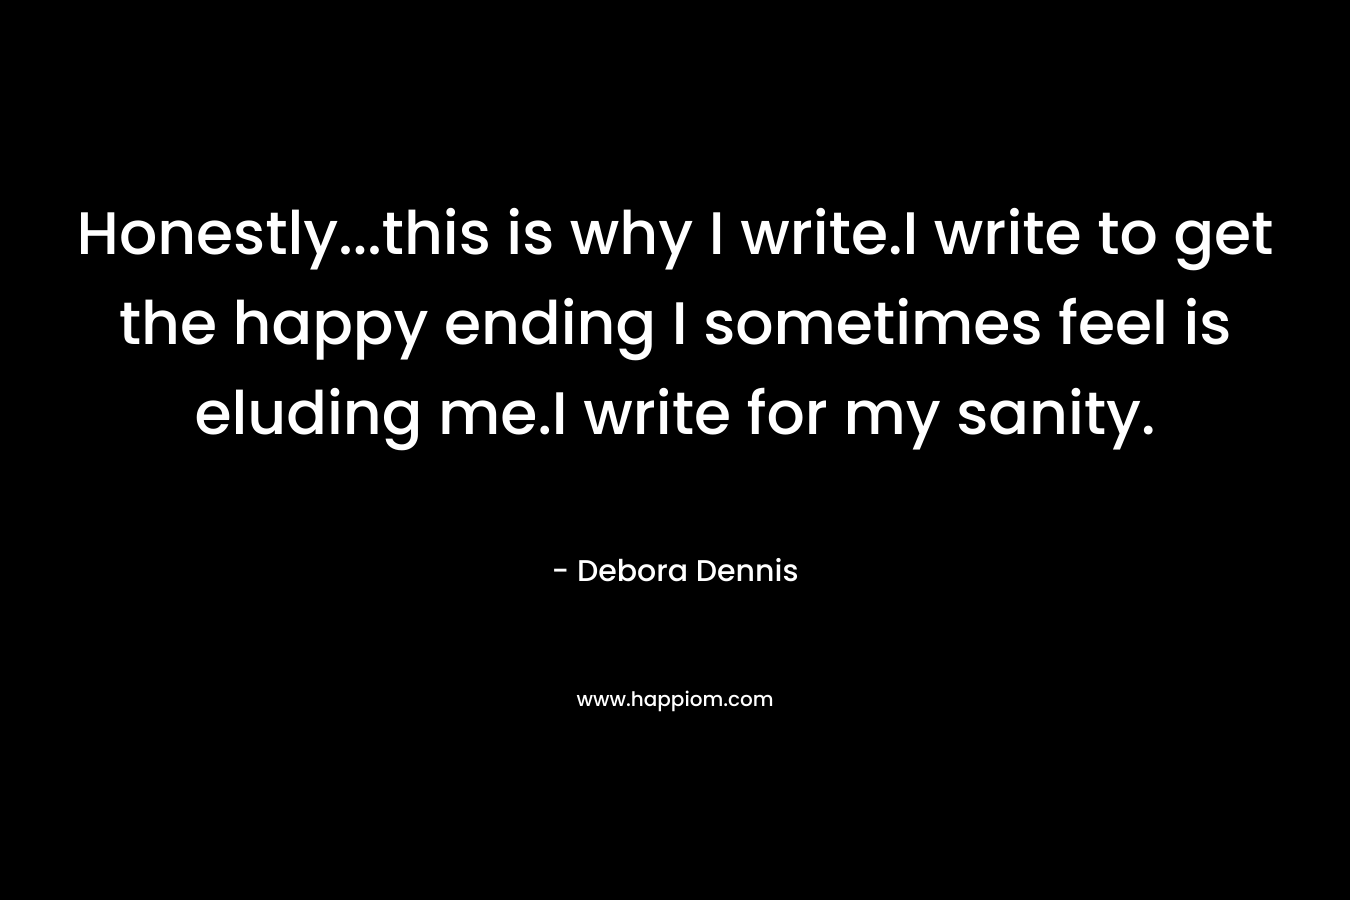 Honestly...this is why I write.I write to get the happy ending I sometimes feel is eluding me.I write for my sanity.